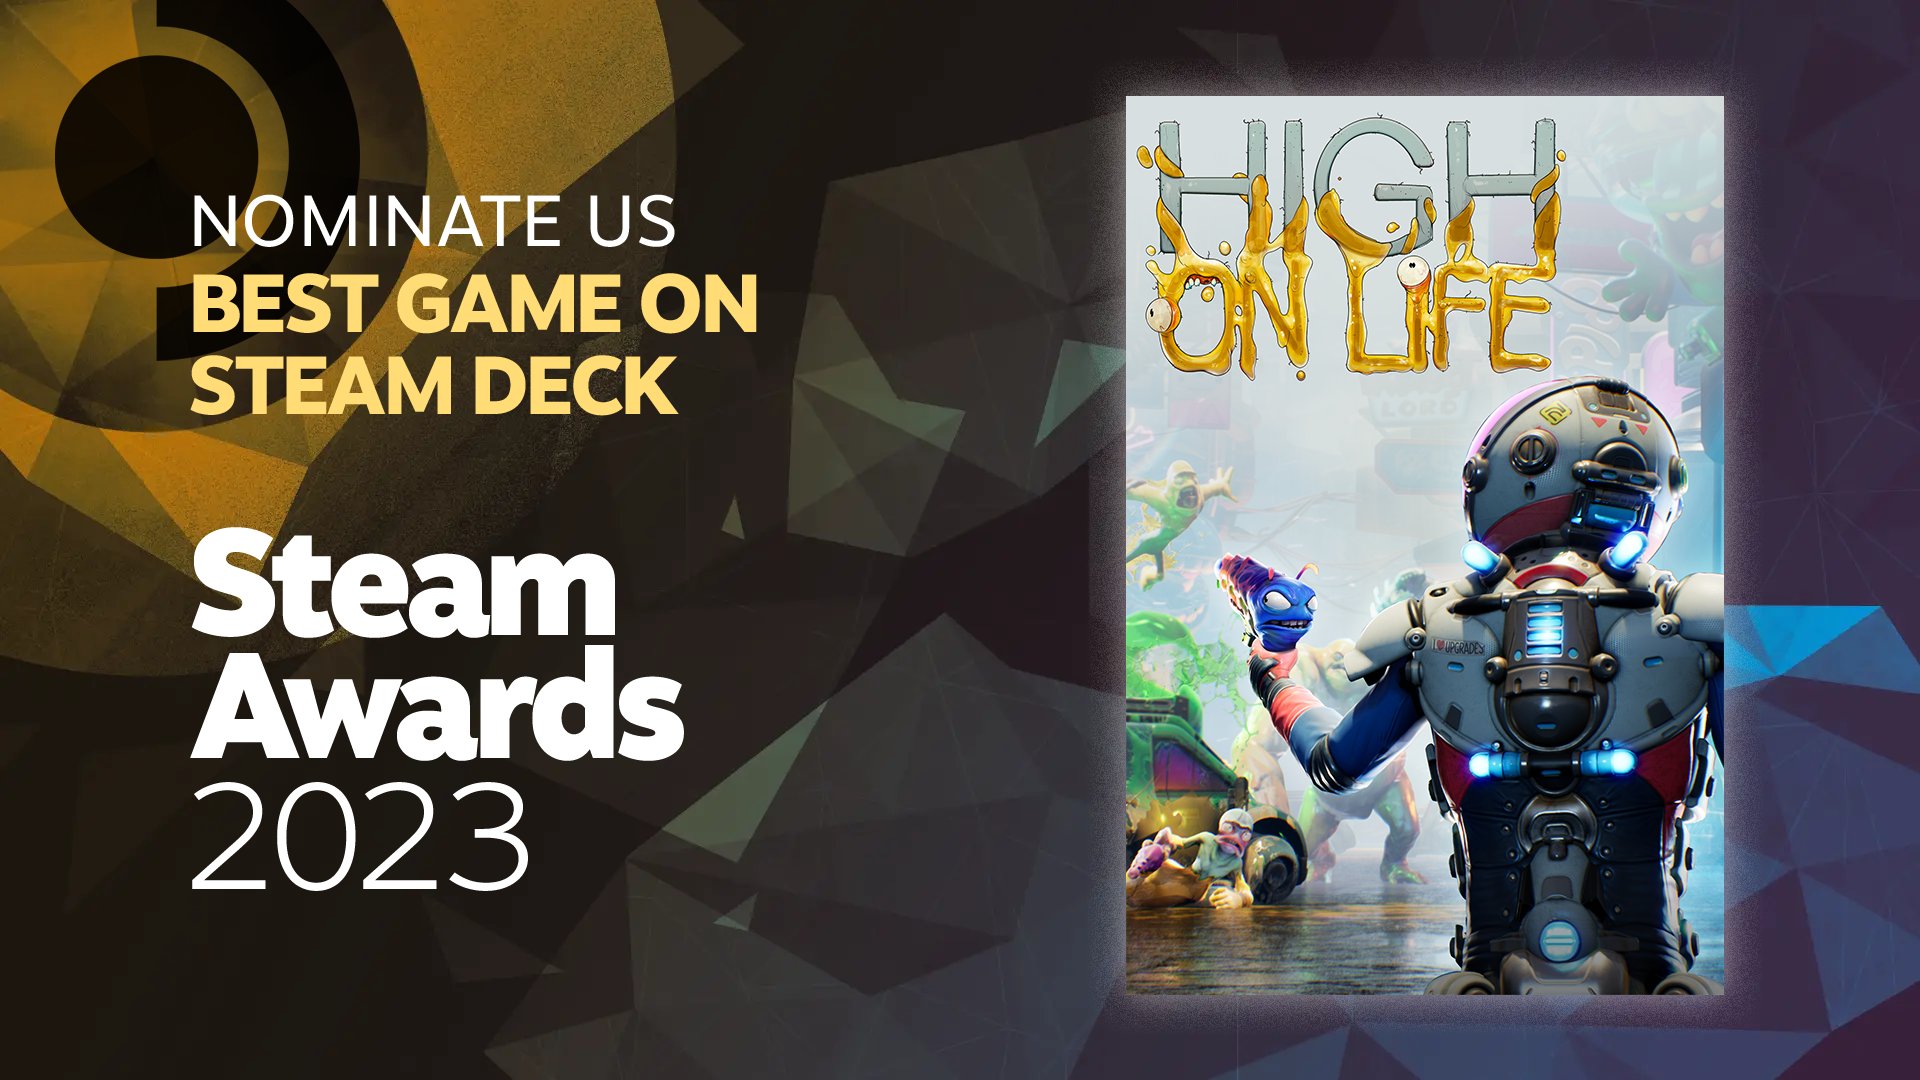 High On Life DLC coming to Xbox next week with 12 new achievements